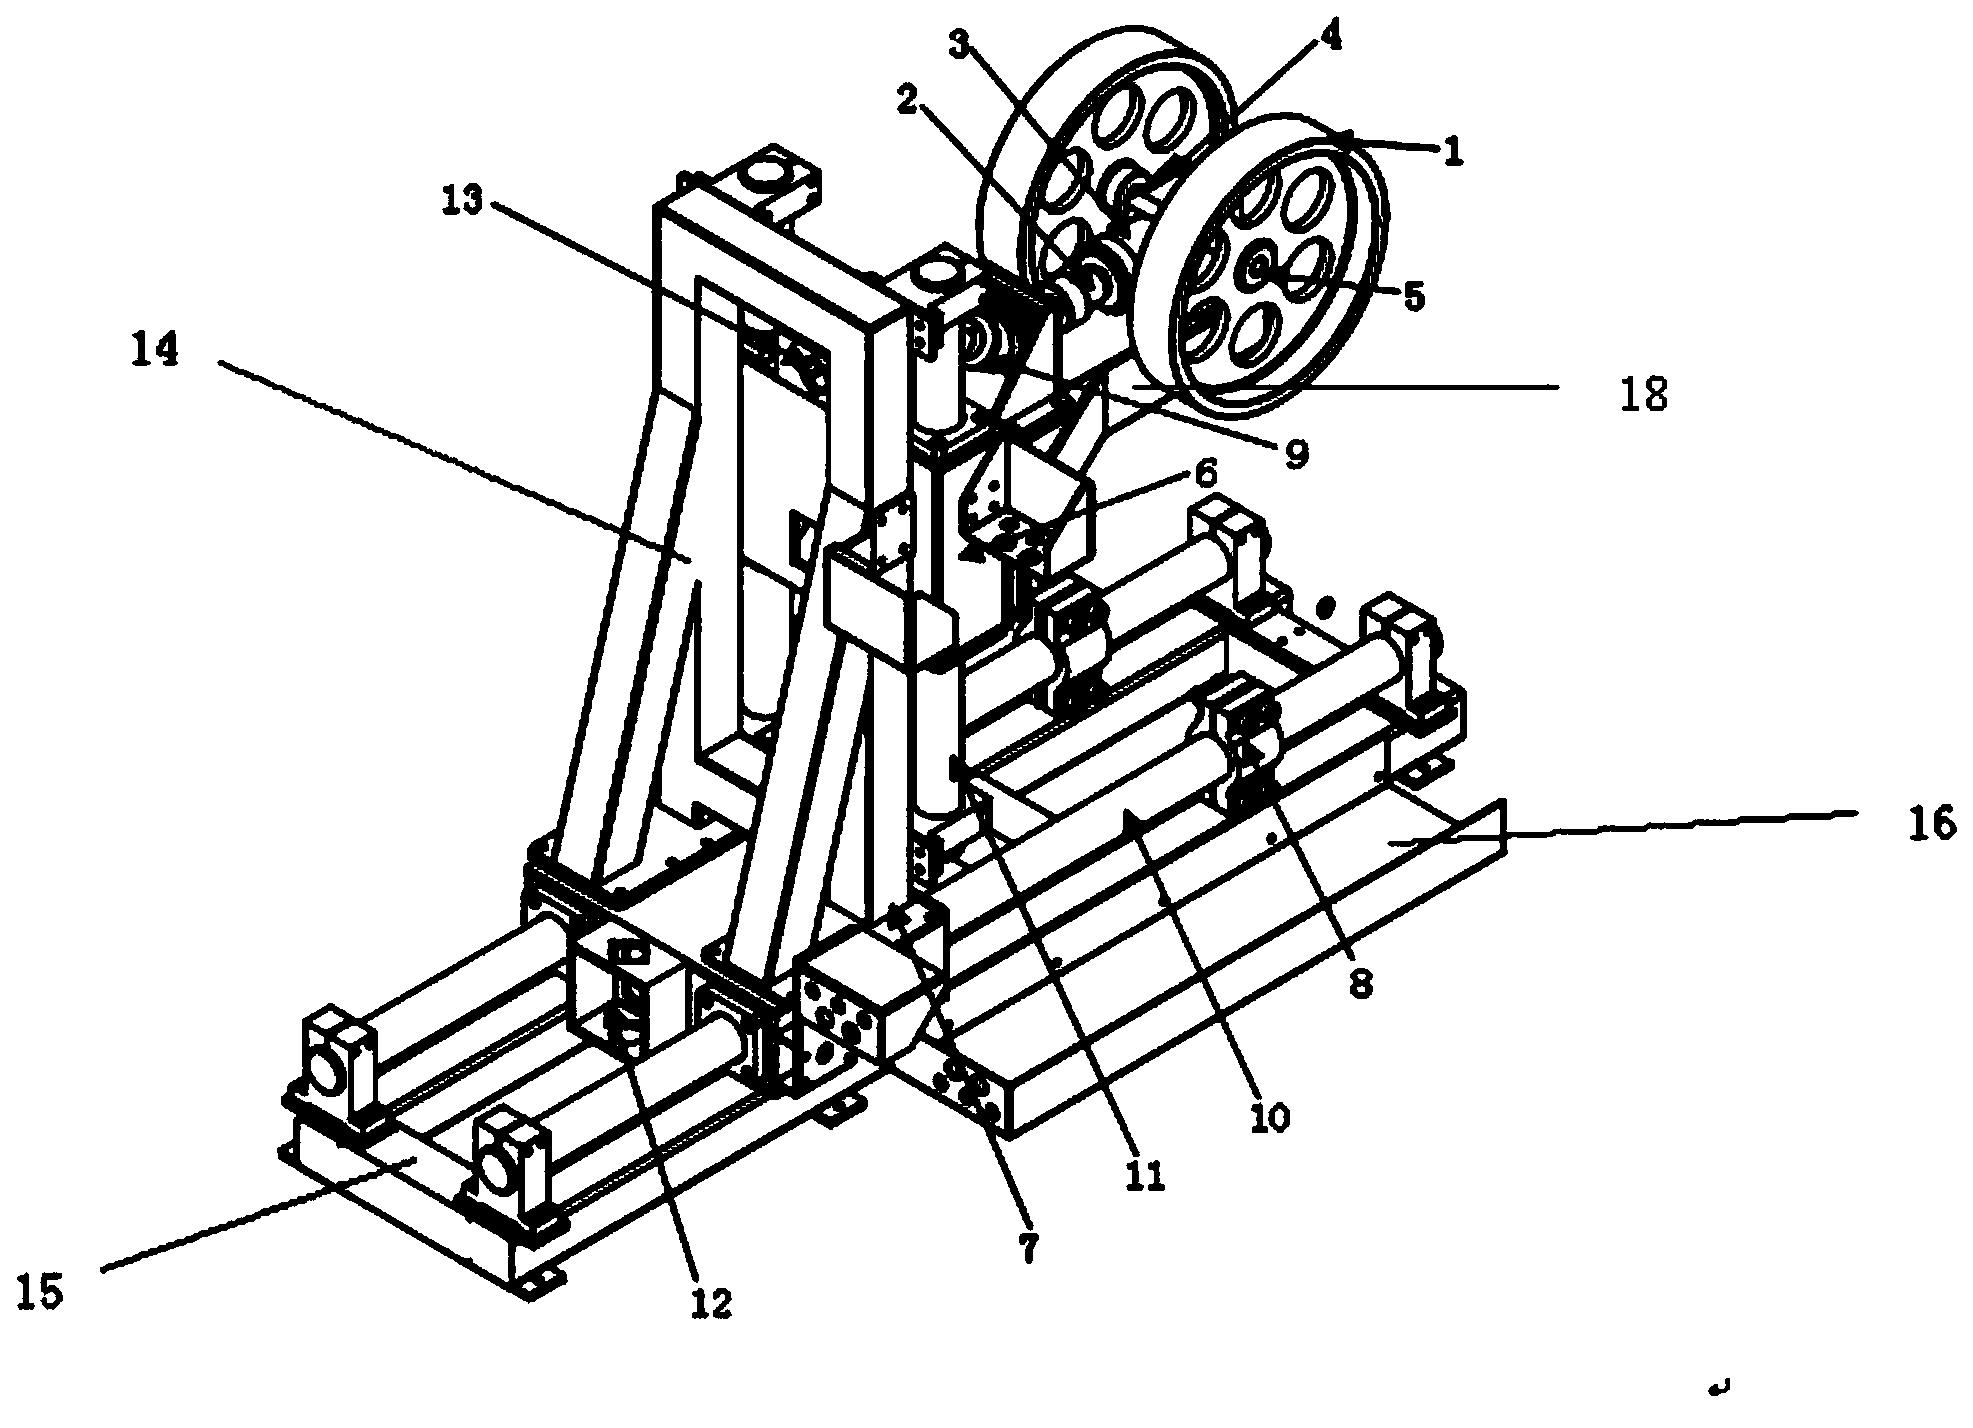 Device for driving helicopter wheel to rotate